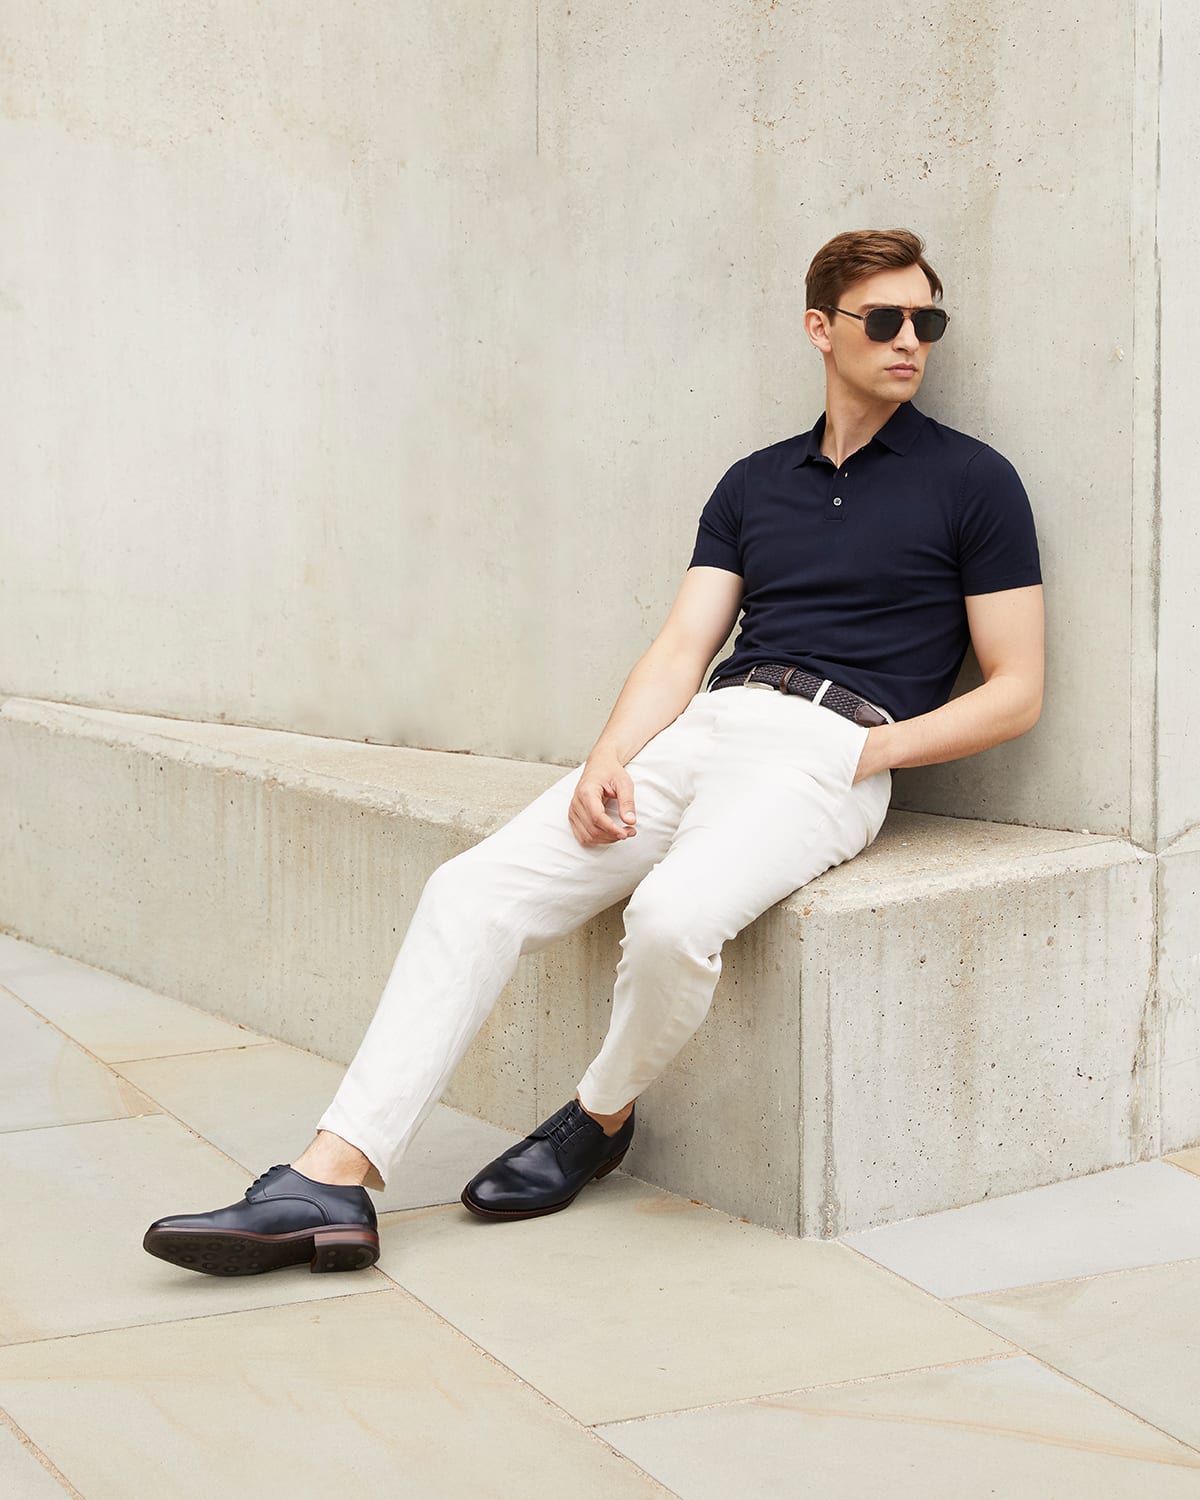 Style Series: Men's Warm Weather Looks - Sinclairs